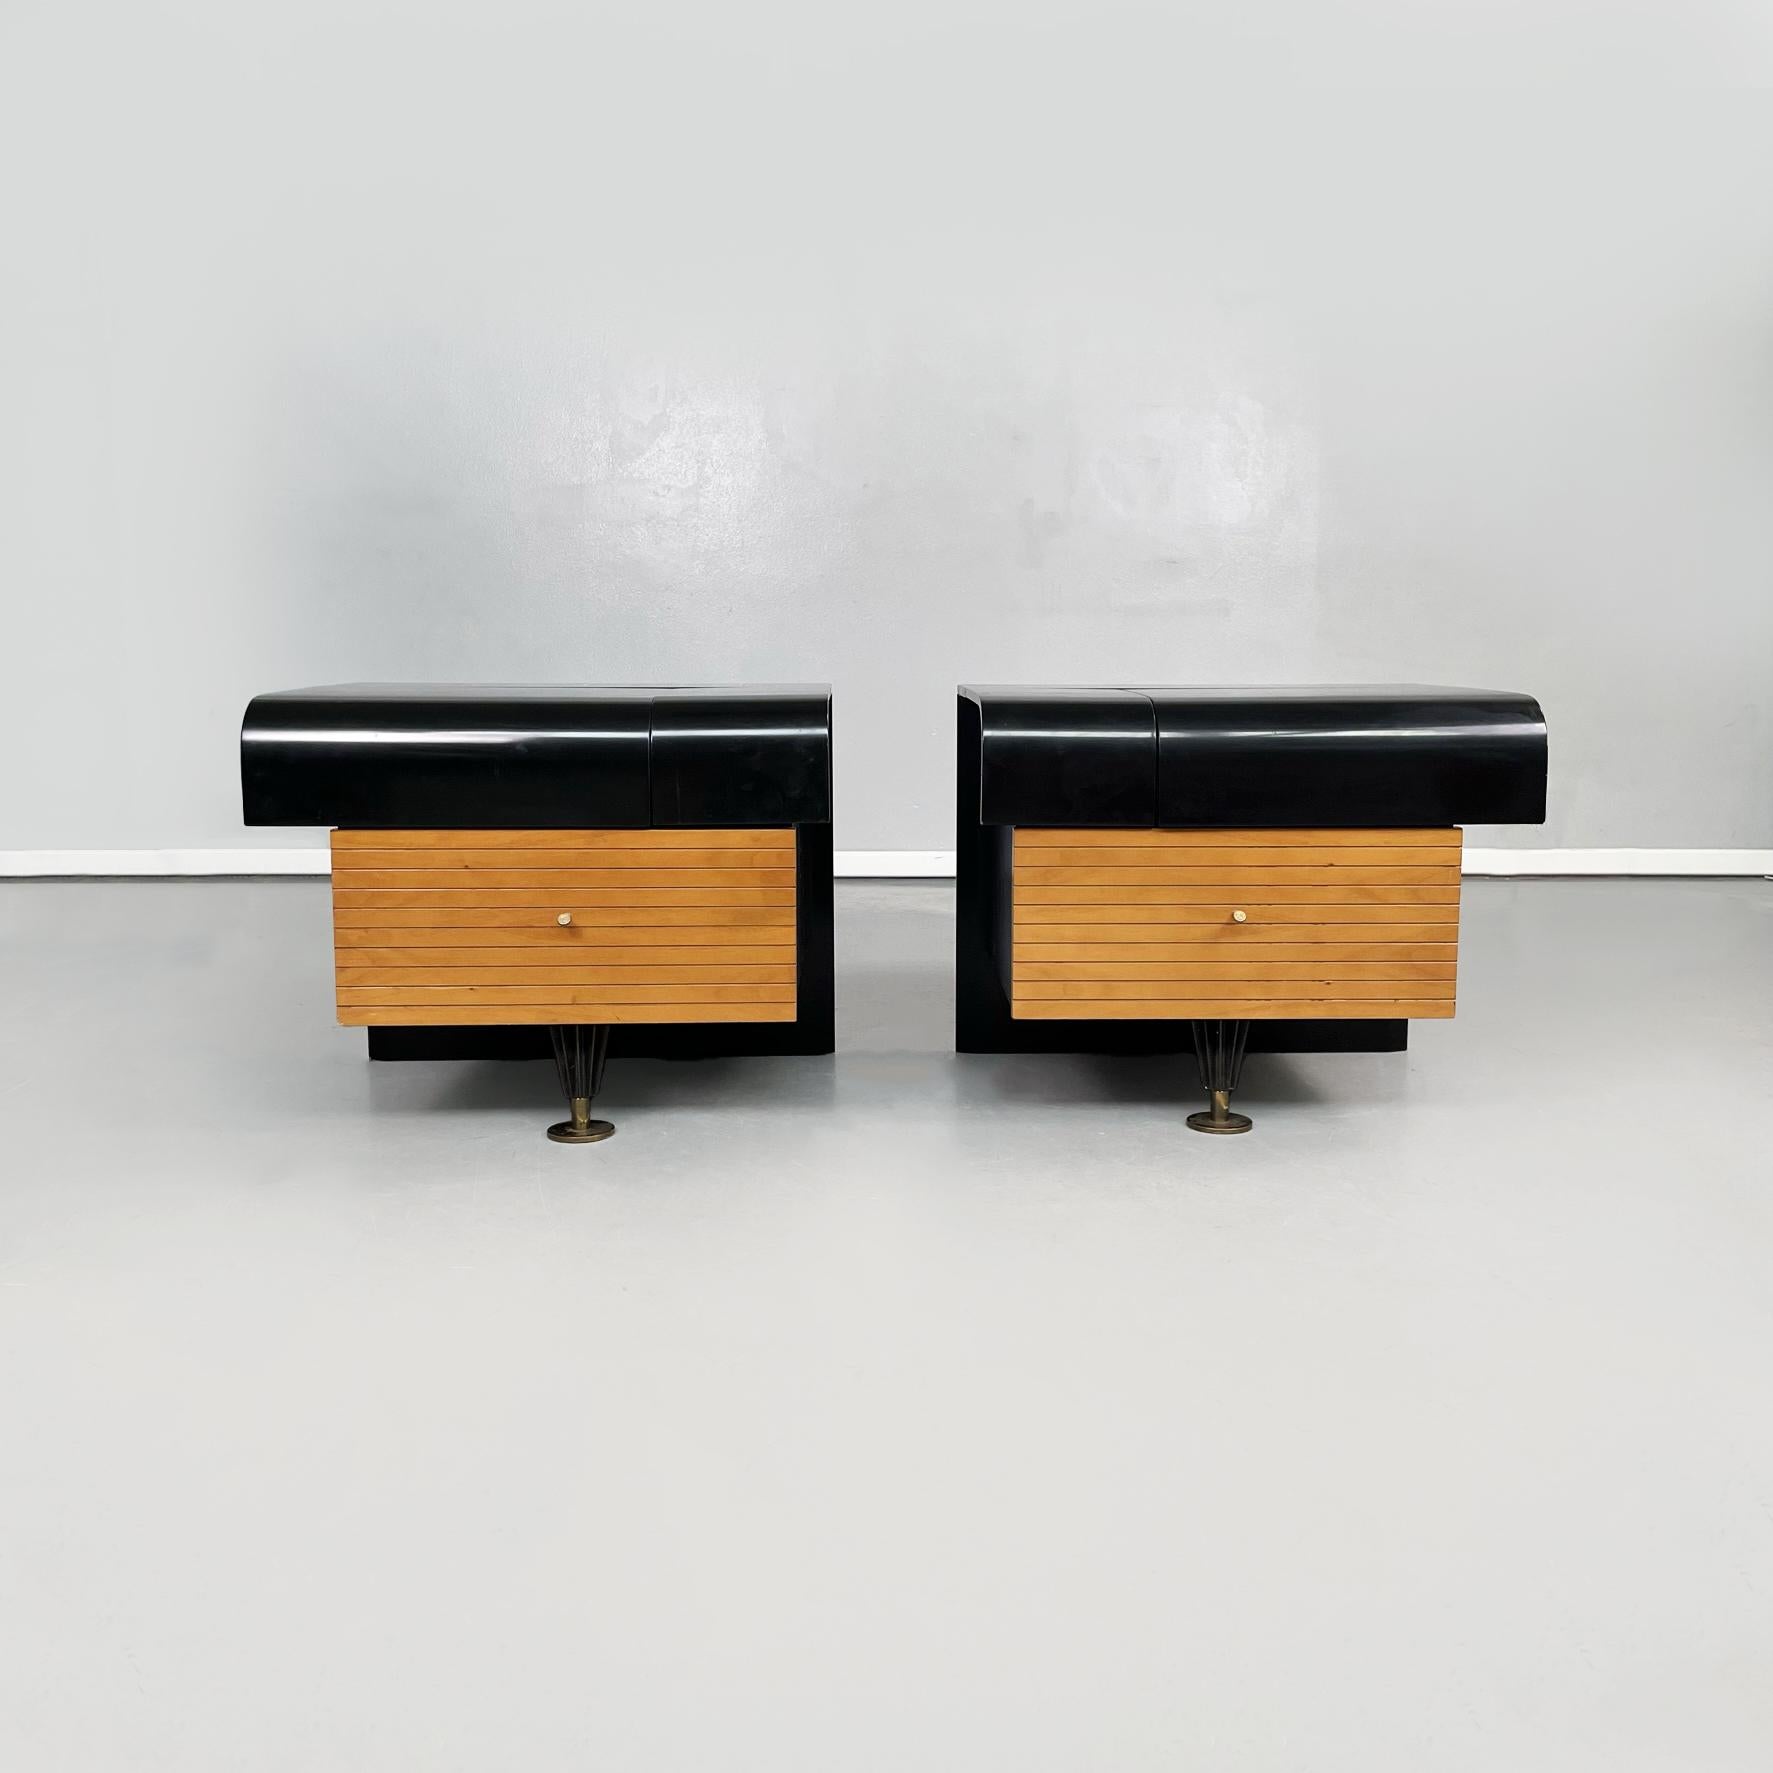 Italian mid-century black wooden, brass bedside tables by Pierre Cardin, 1980s
Pair of wooden bedside tables with a rectangular base. The upper top is rectangular with a curved front profile, in black painted wood. There is a compartment with a